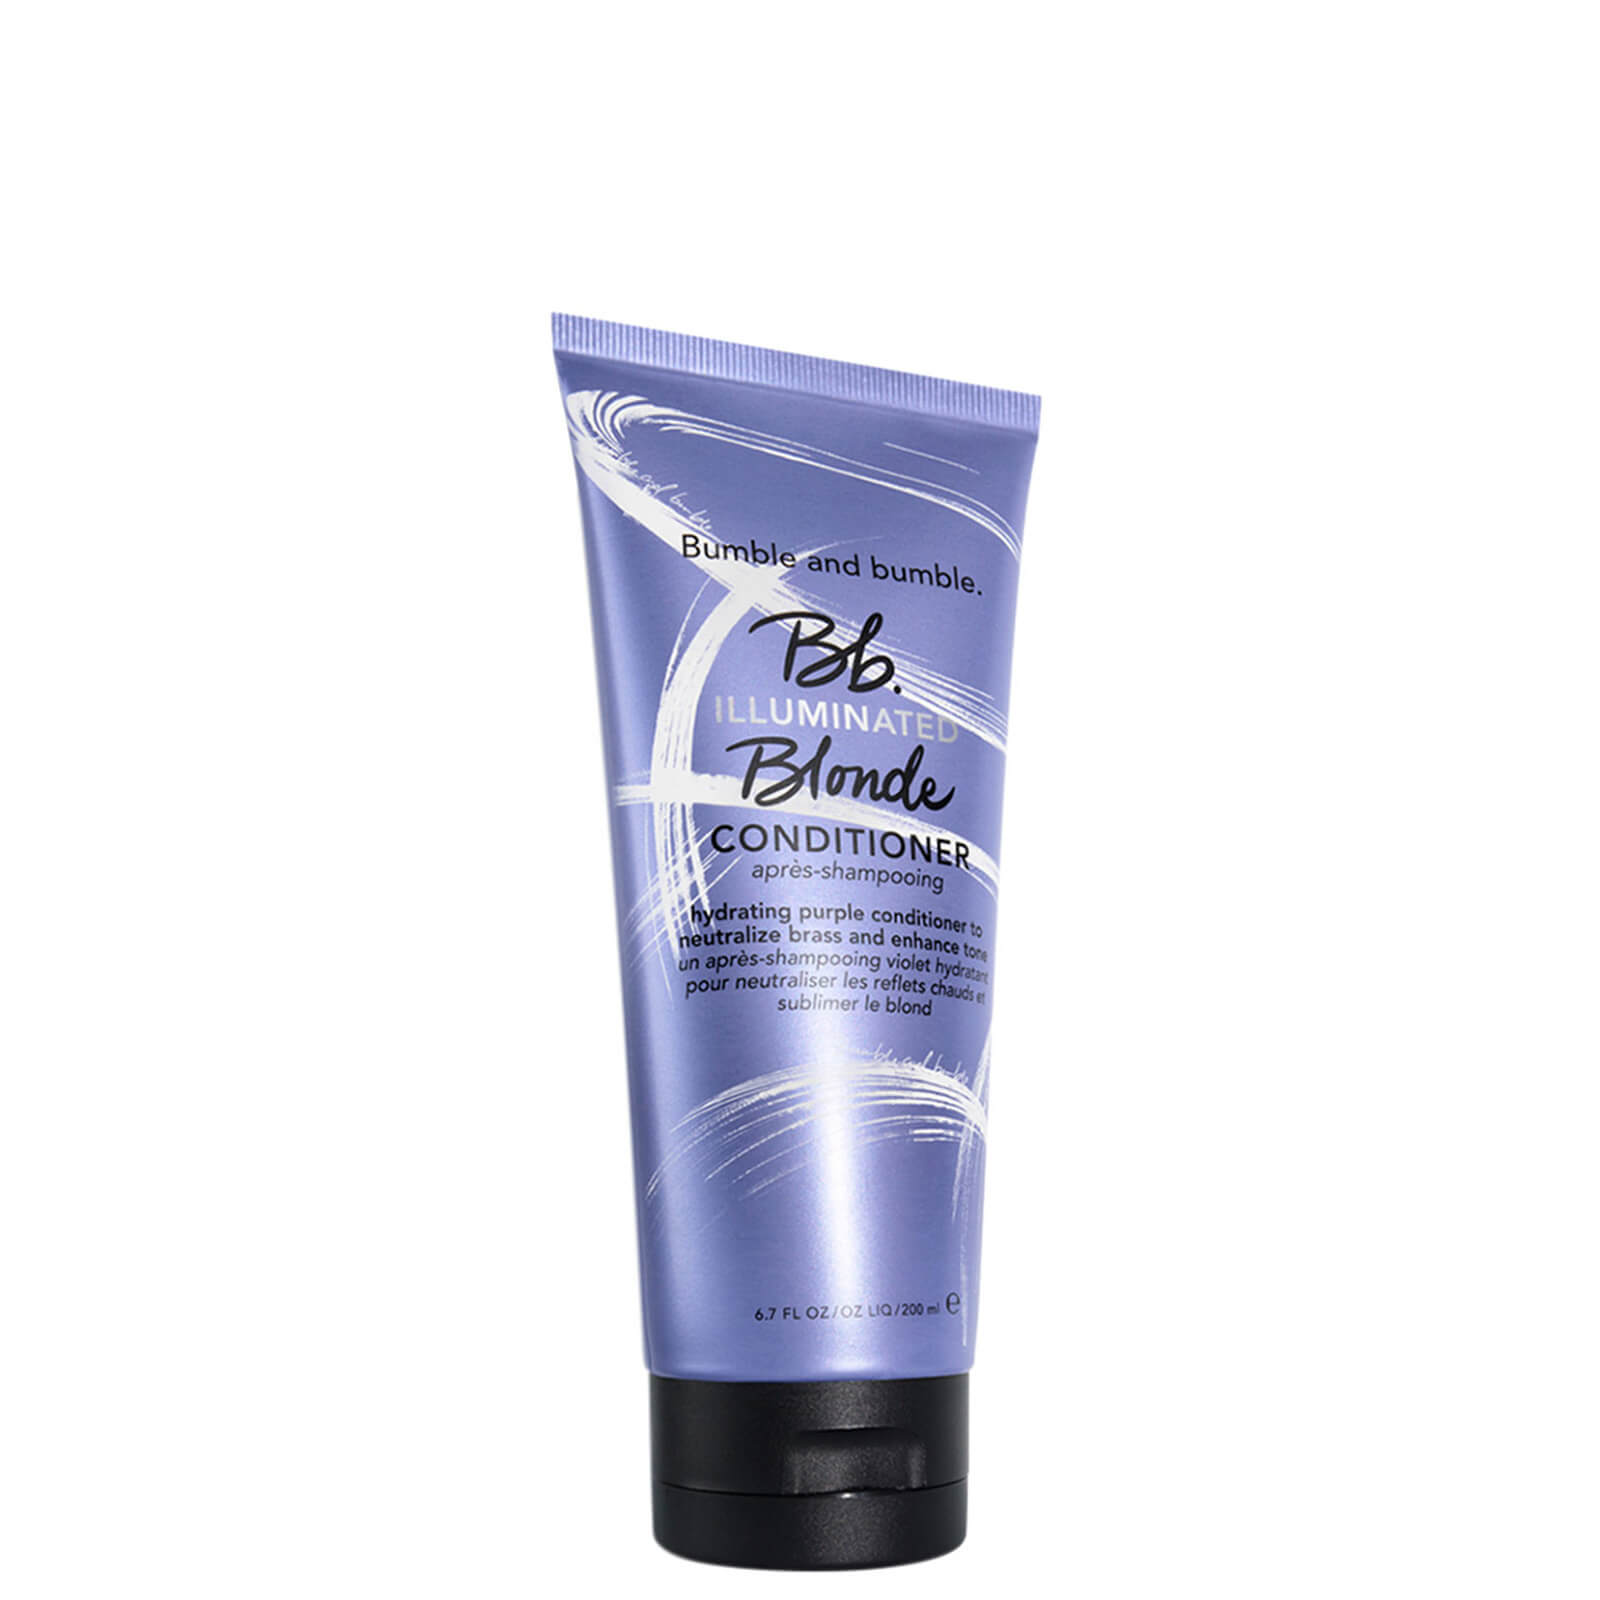 Image of Bumble and bumble Blonde Conditioner (Various Sizes) - 200ml